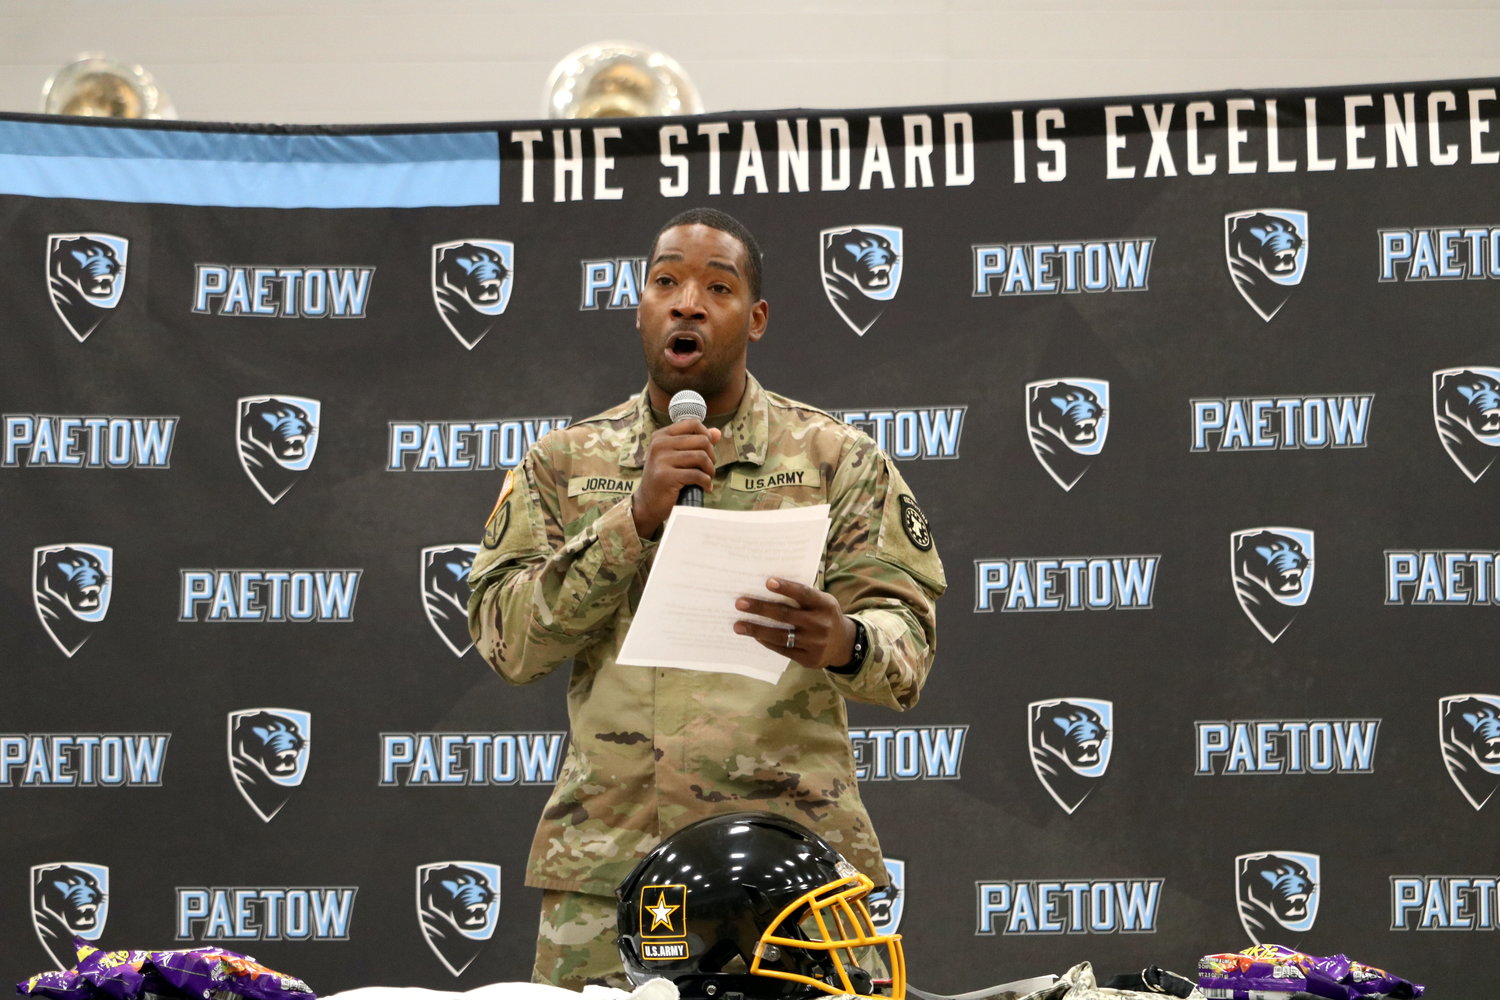 Staff Sargent Jordan of the U.S. Army talks during Friday’s pep rally at Paetow.